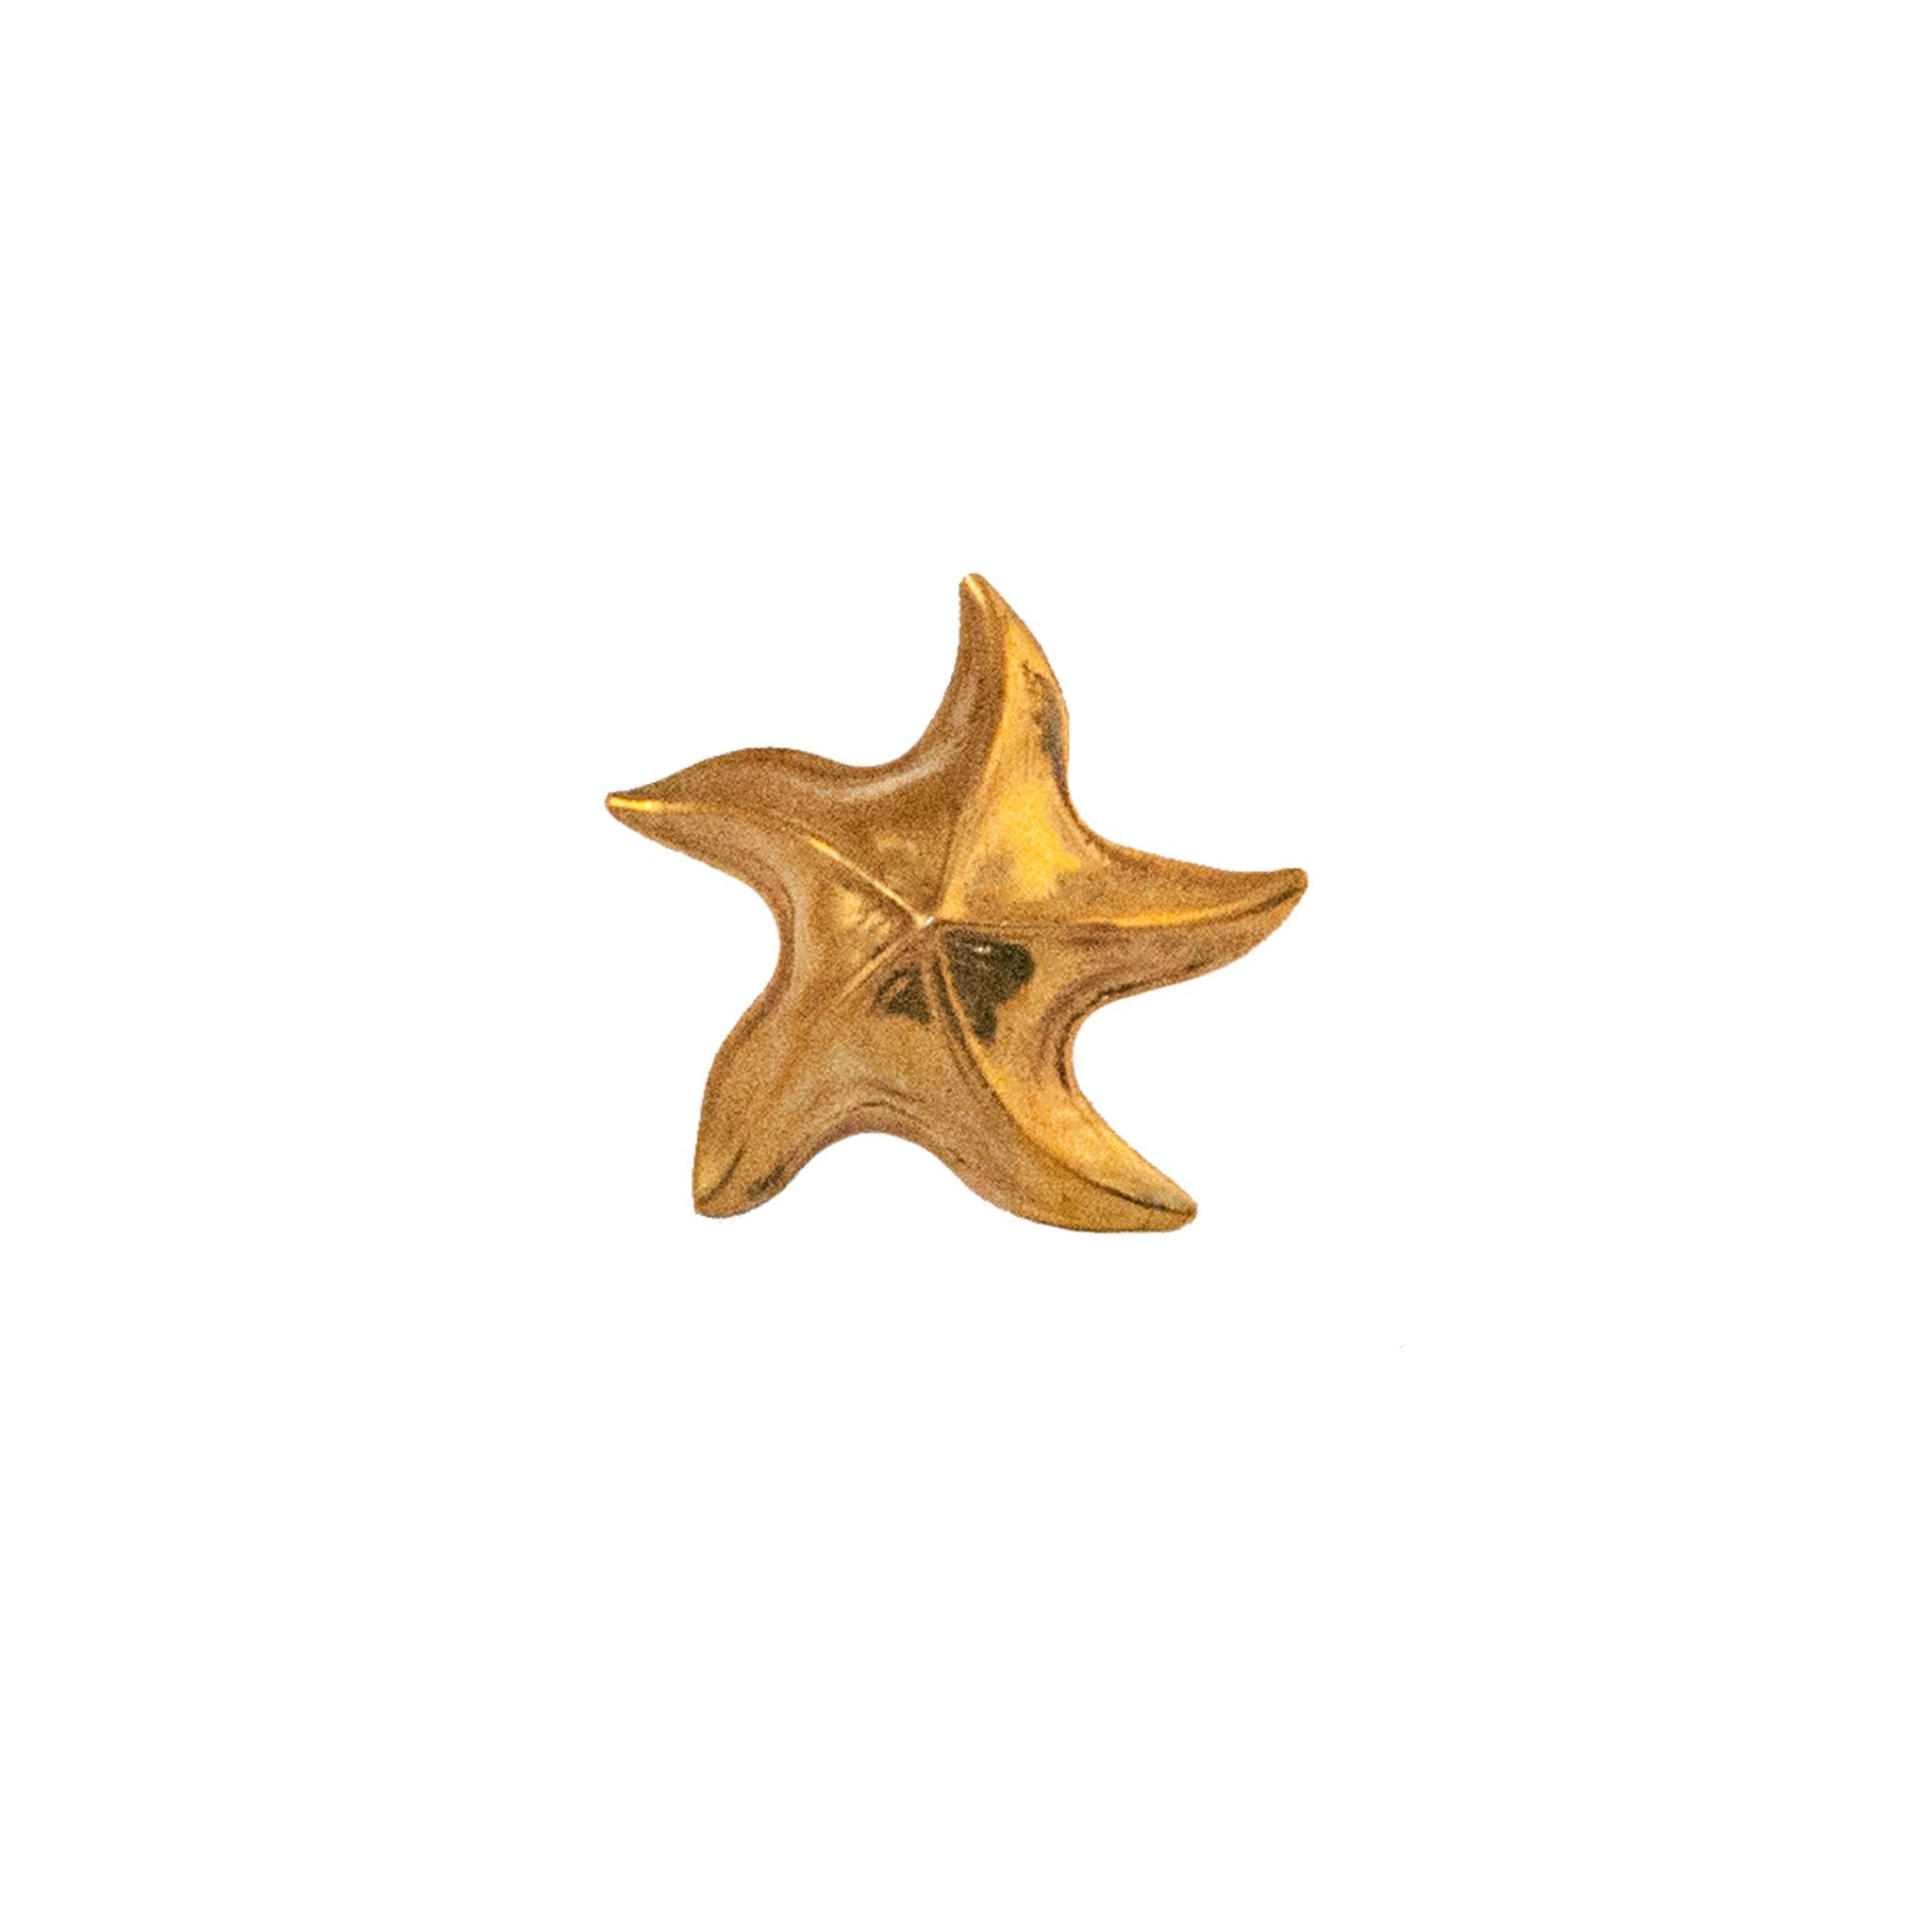 Brass knob resembling a detailed starfish from the Lipari collection, designed to enhance cabinets, drawers, and doors with a chic maritime aesthetic.